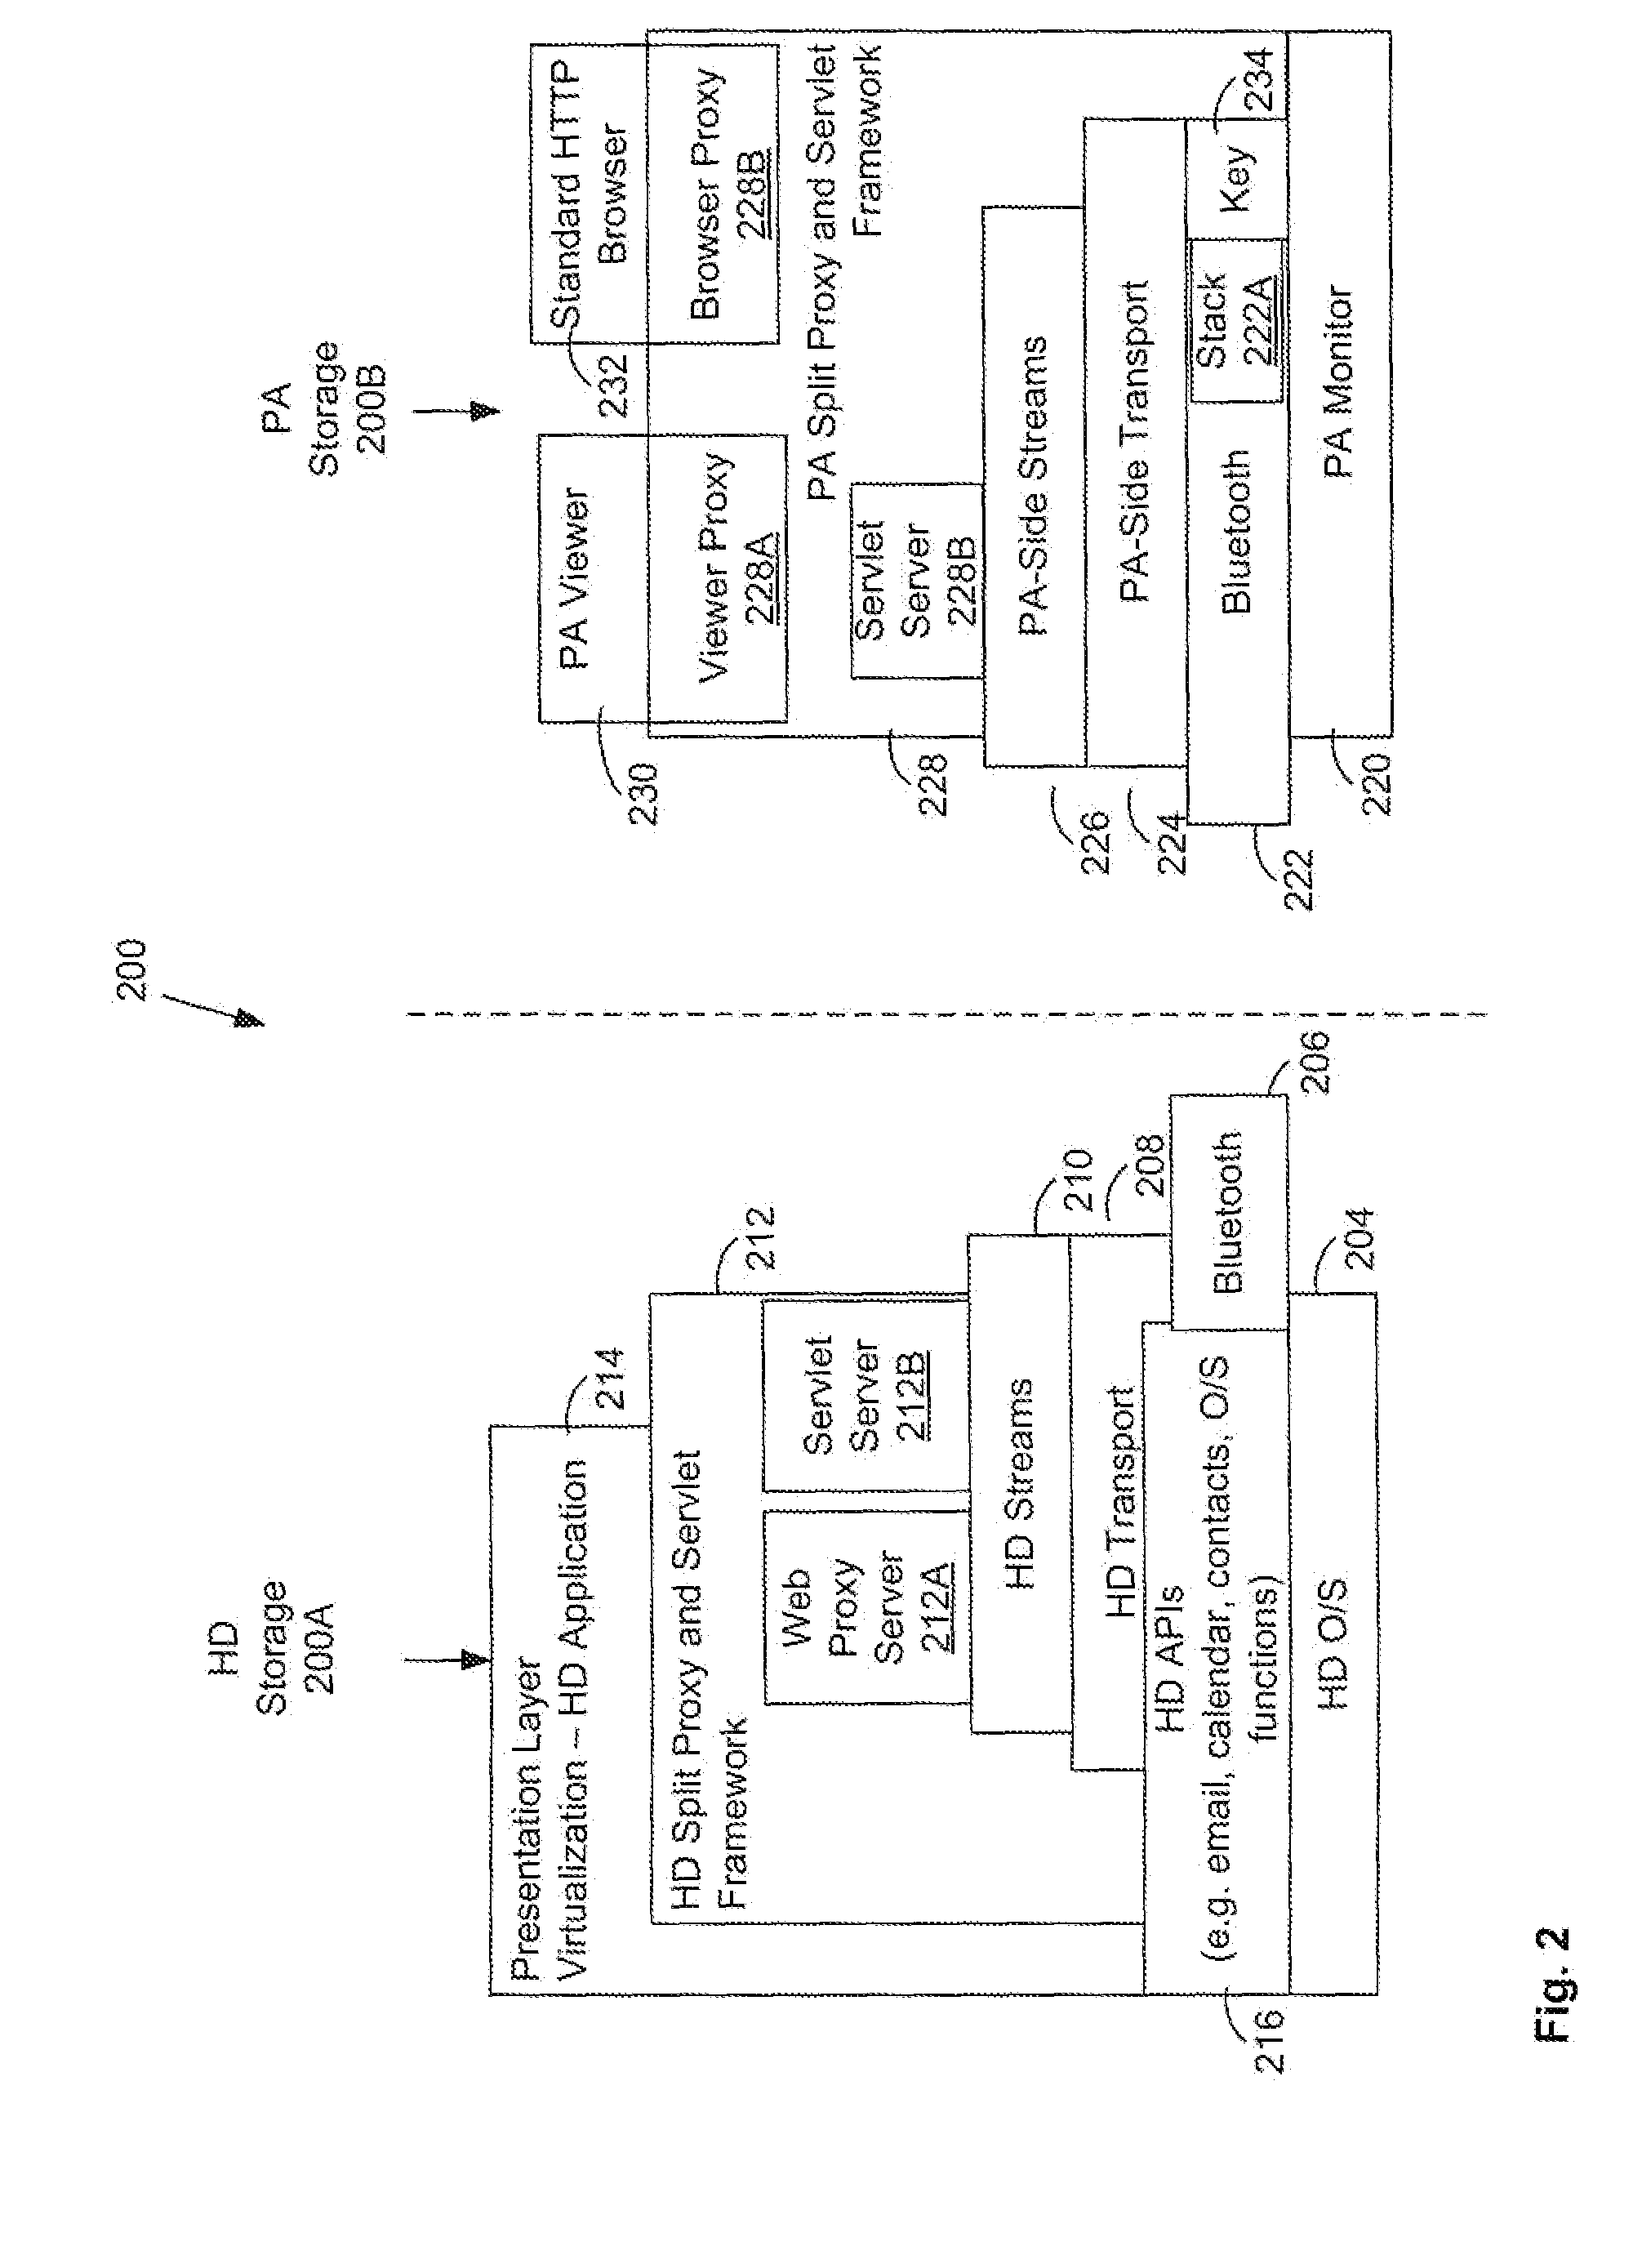 Secured presentation layer virtualization for wireless handheld communication device